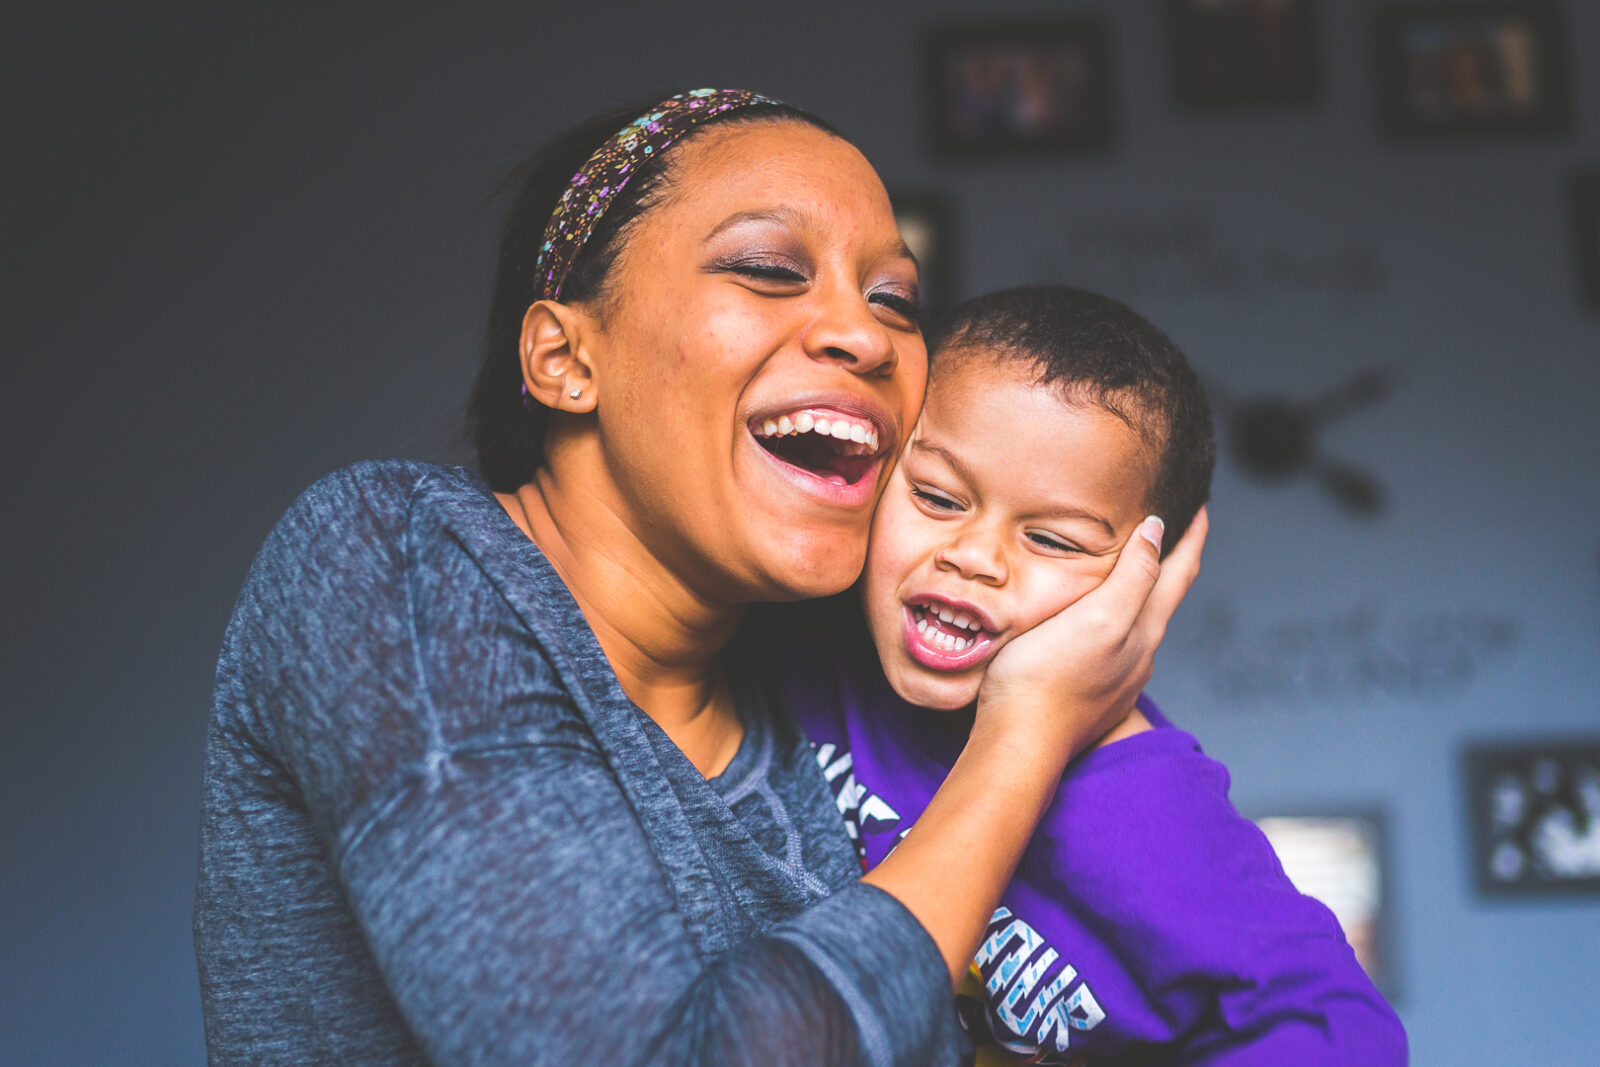 A woman with a floral headband and a gray top shares a genuine moment of laughter with a young boy in a purple shirt. The woman is smiling widely with her mouth open in a joyful laugh, her eyes slightly closed. She gently holds the boy's head against her cheek, both displaying expressions of happiness and affection. They are indoors, with a blurred background featuring picture frames on the wall.